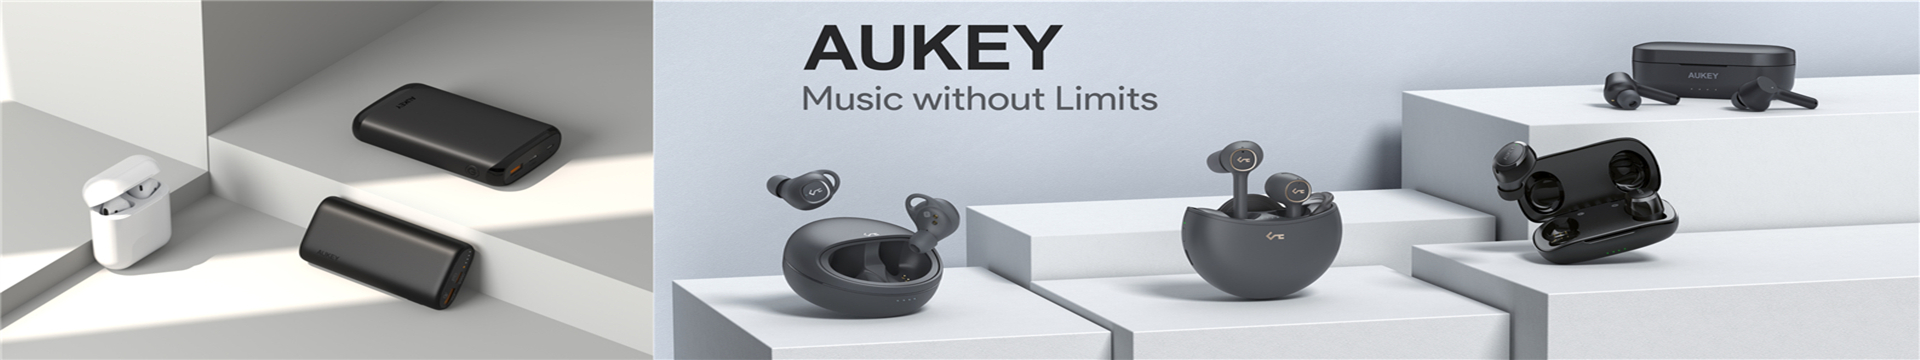 aukey store banner picture